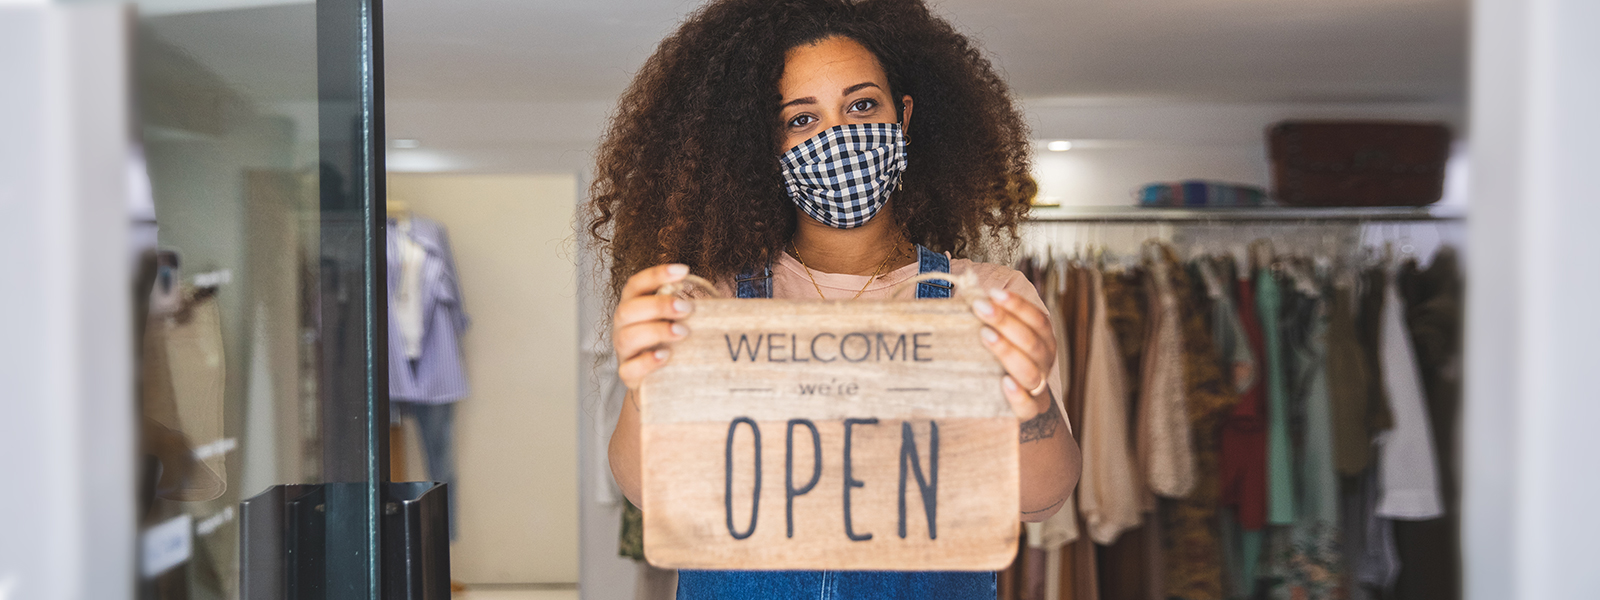 How to Have a Successful Small Business Saturday During the COVID-19 Pandemic